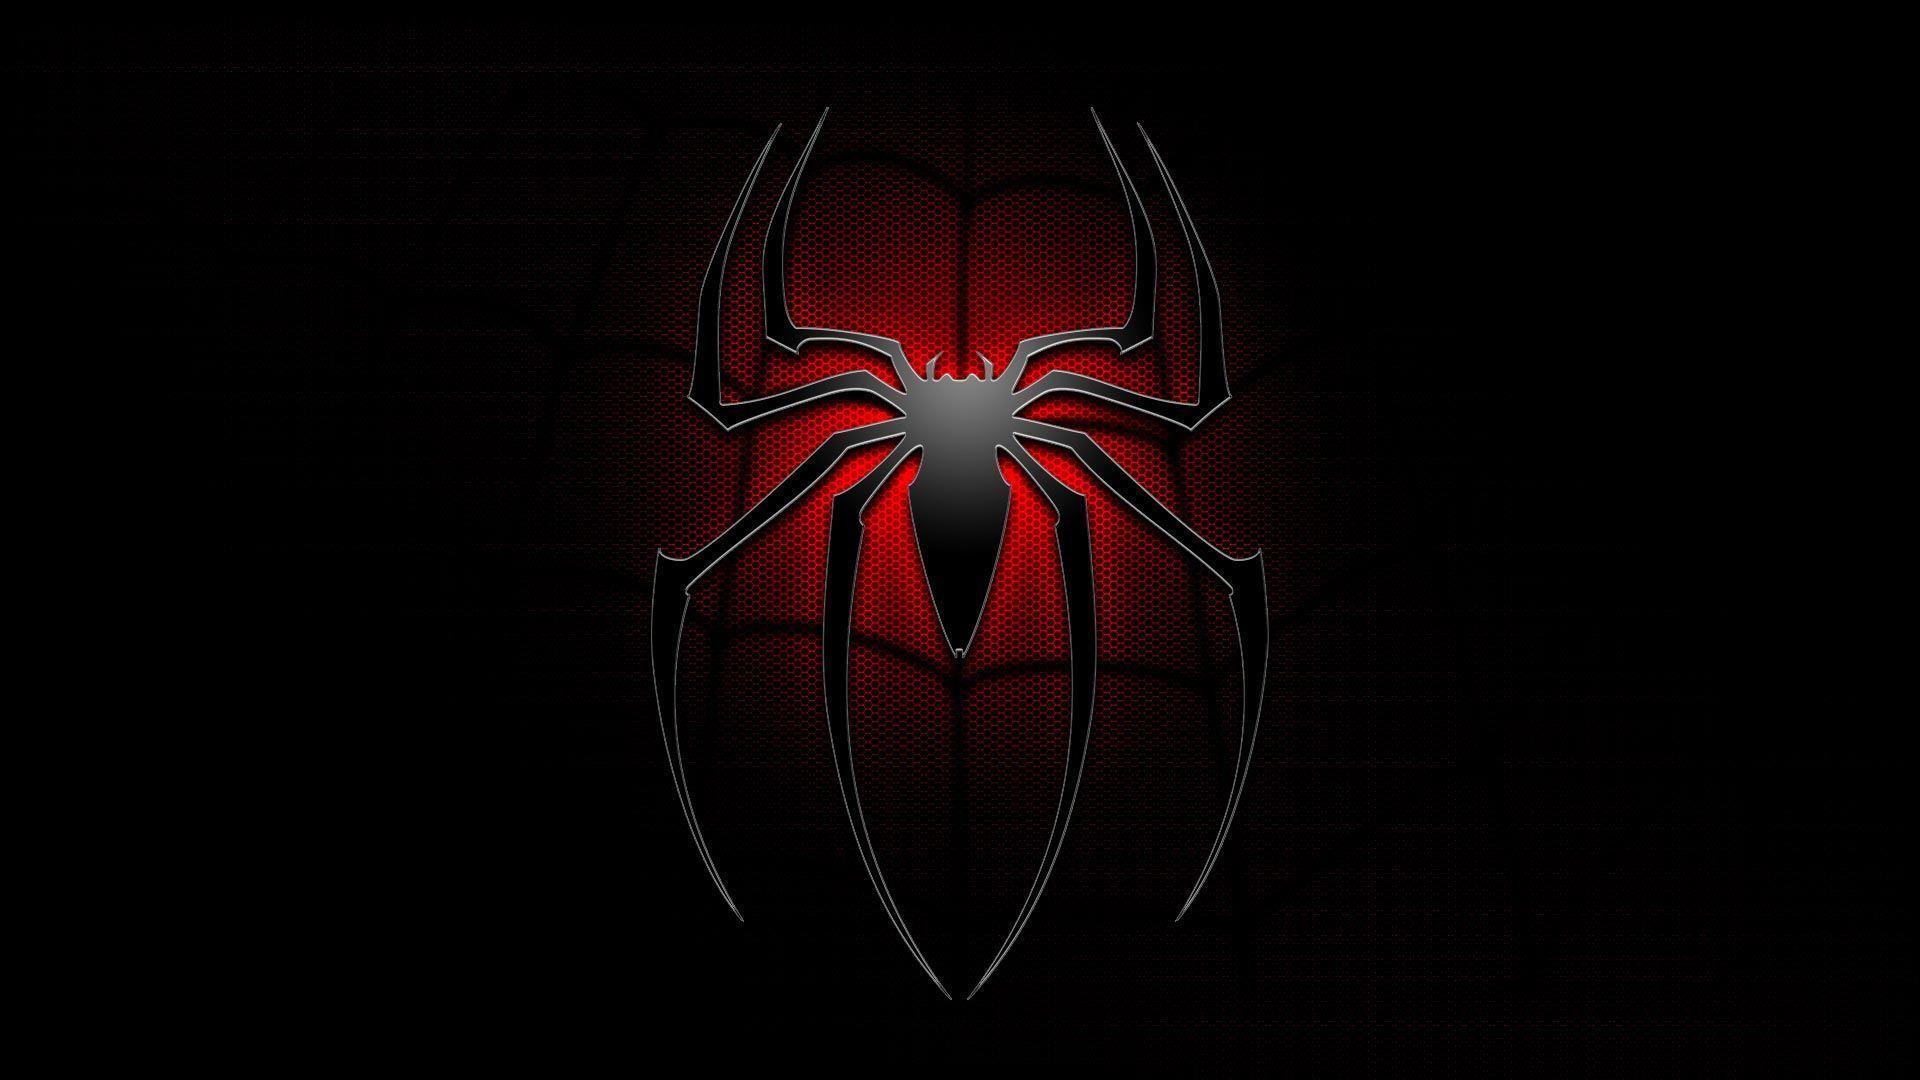 spiderman logo 2014 « Wallpaper Wide, HD (High Definition) and Mobile